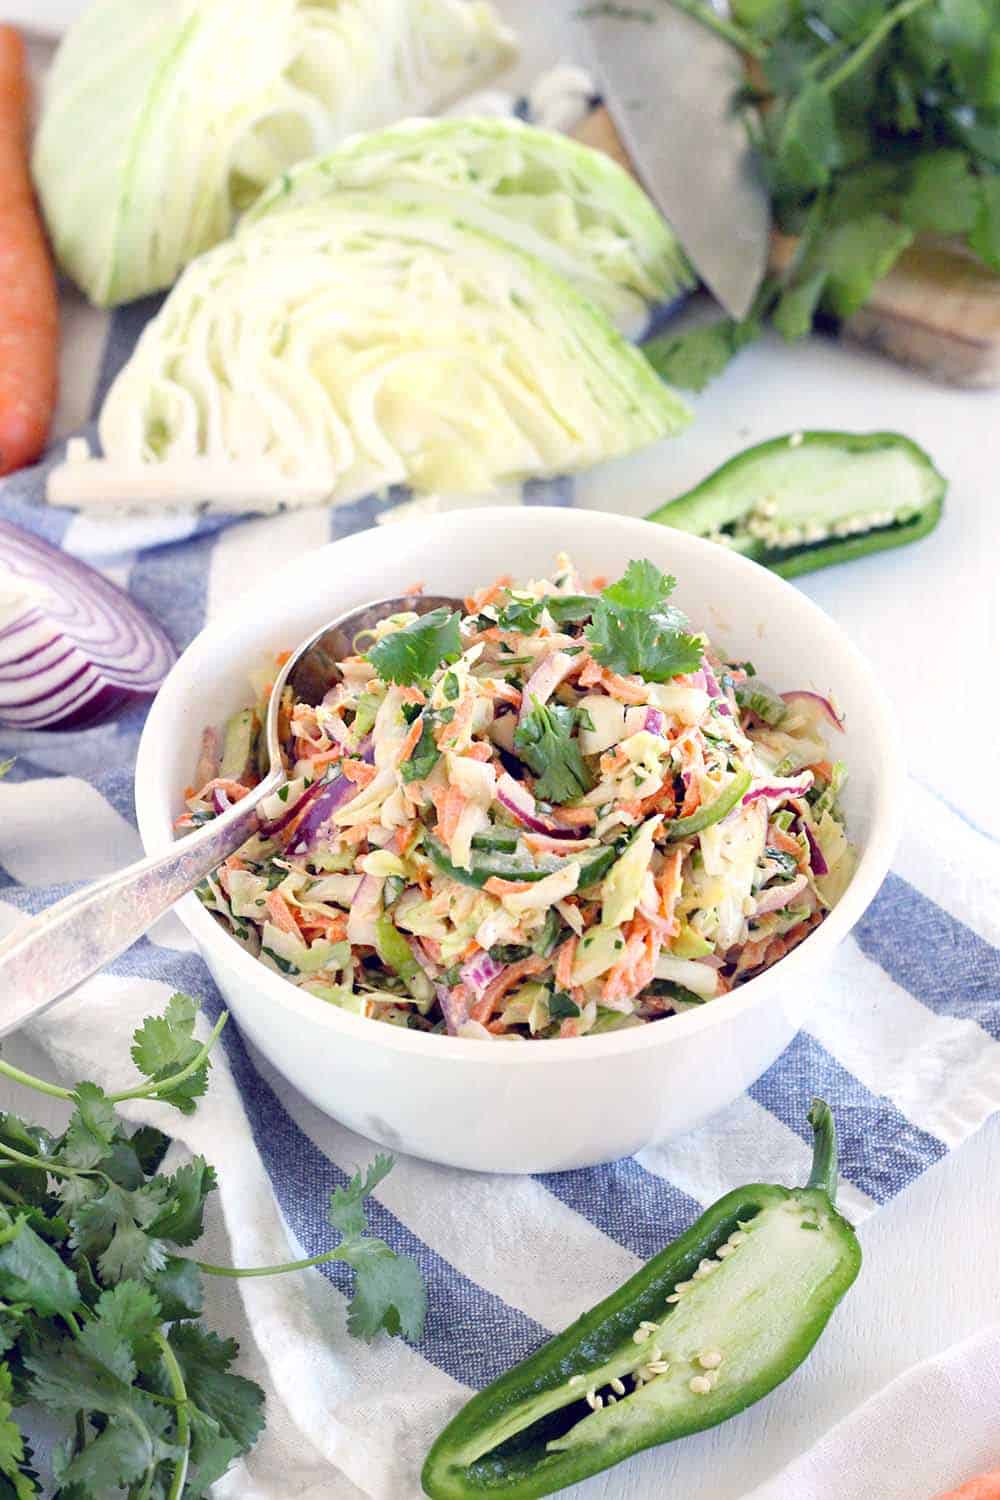 This easy, delicious recipe for Spicy Jalapeno Cilantro Slaw is great as a side, or on top of your favorite pulled pork sandwiches or fish tacos! Vegetarian, vegan optional, low carb, and paleo compliant.